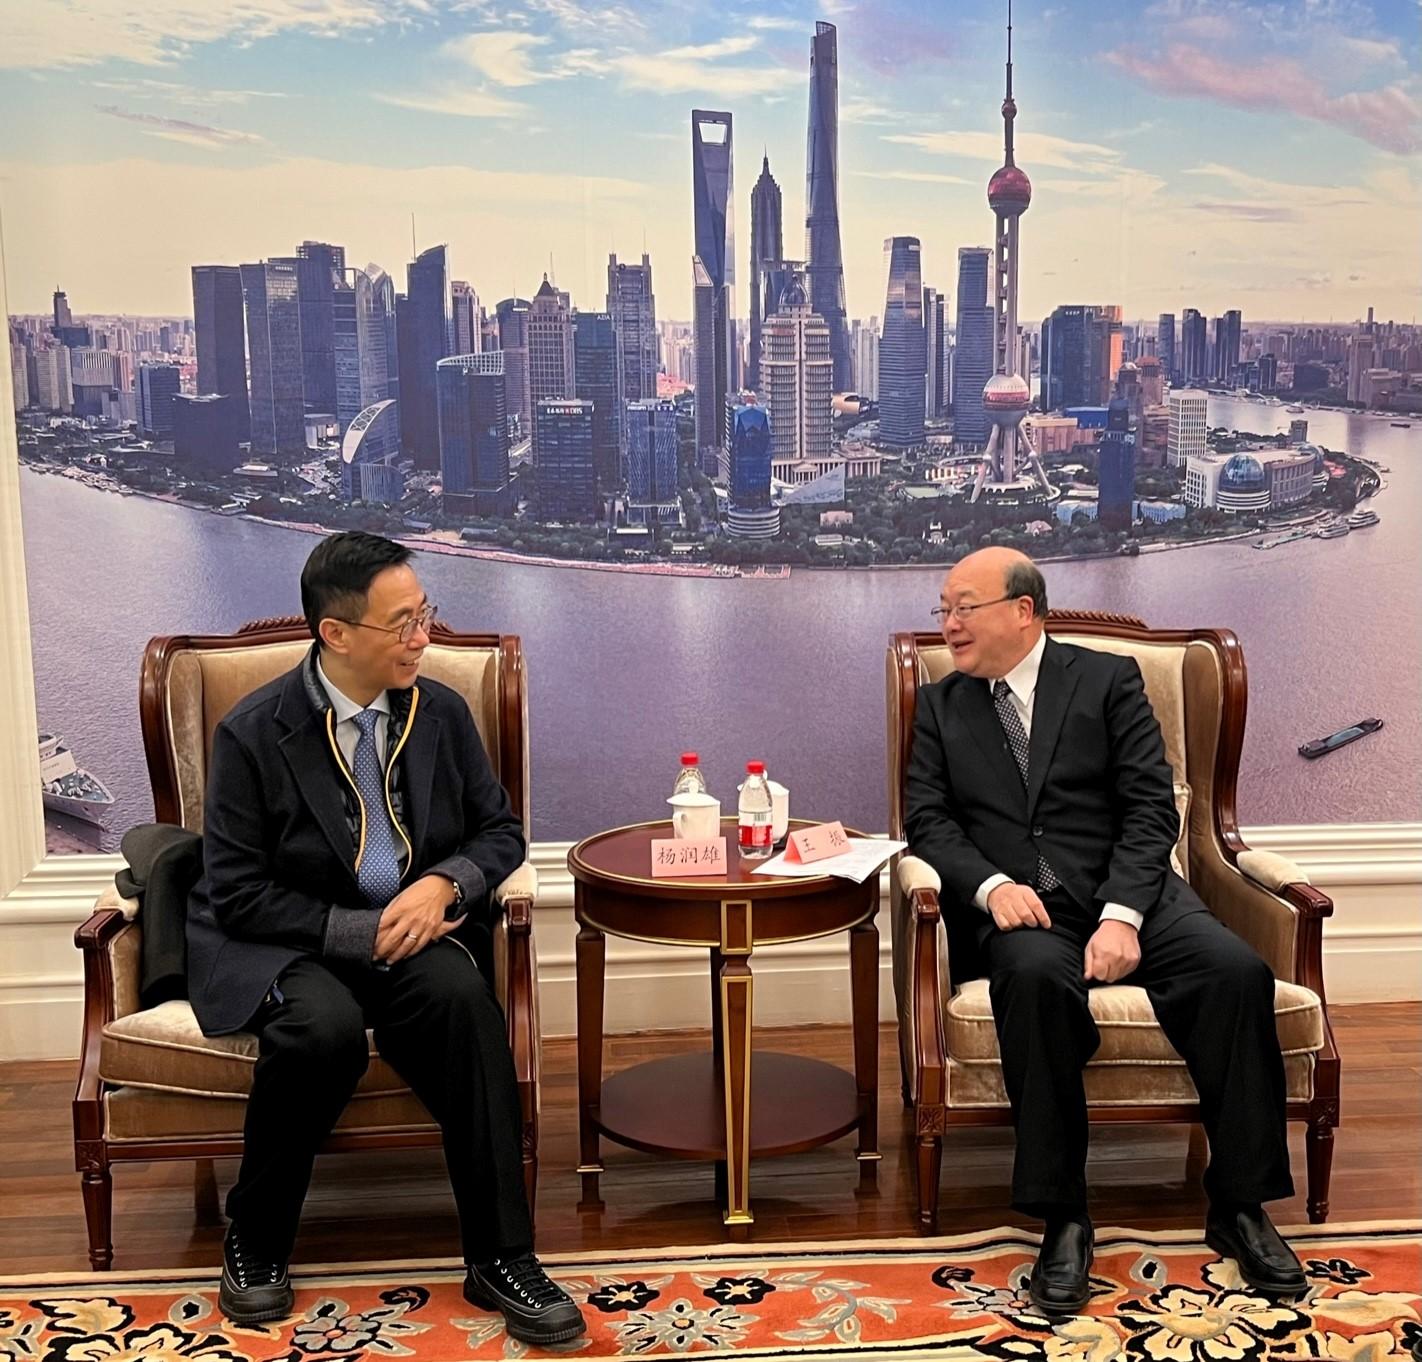 The Secretary for Culture, Sports and Tourism, Mr Kevin Yeung (left), meets with Vice President of the Shanghai Academy of Social Sciences Mr Wang Zhen and has an exchange before a cultural conference in Shanghai today (January 8).